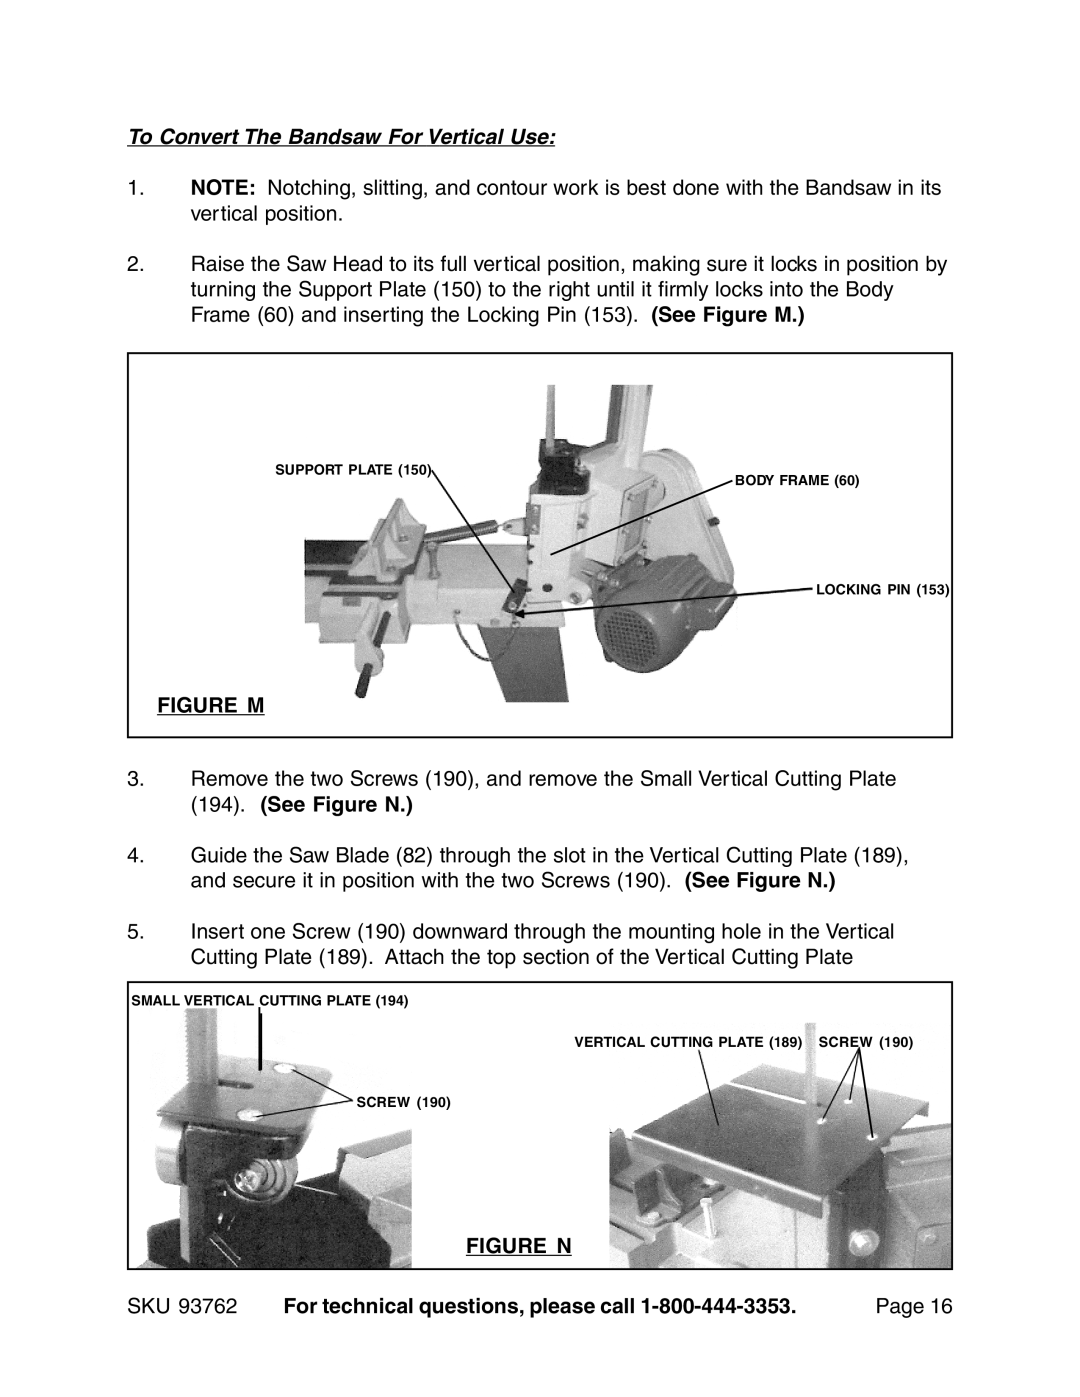 Harbor Freight Tools 93762 operating instructions To Convert The Bandsaw For Vertical Use, Figure M, Figure N 